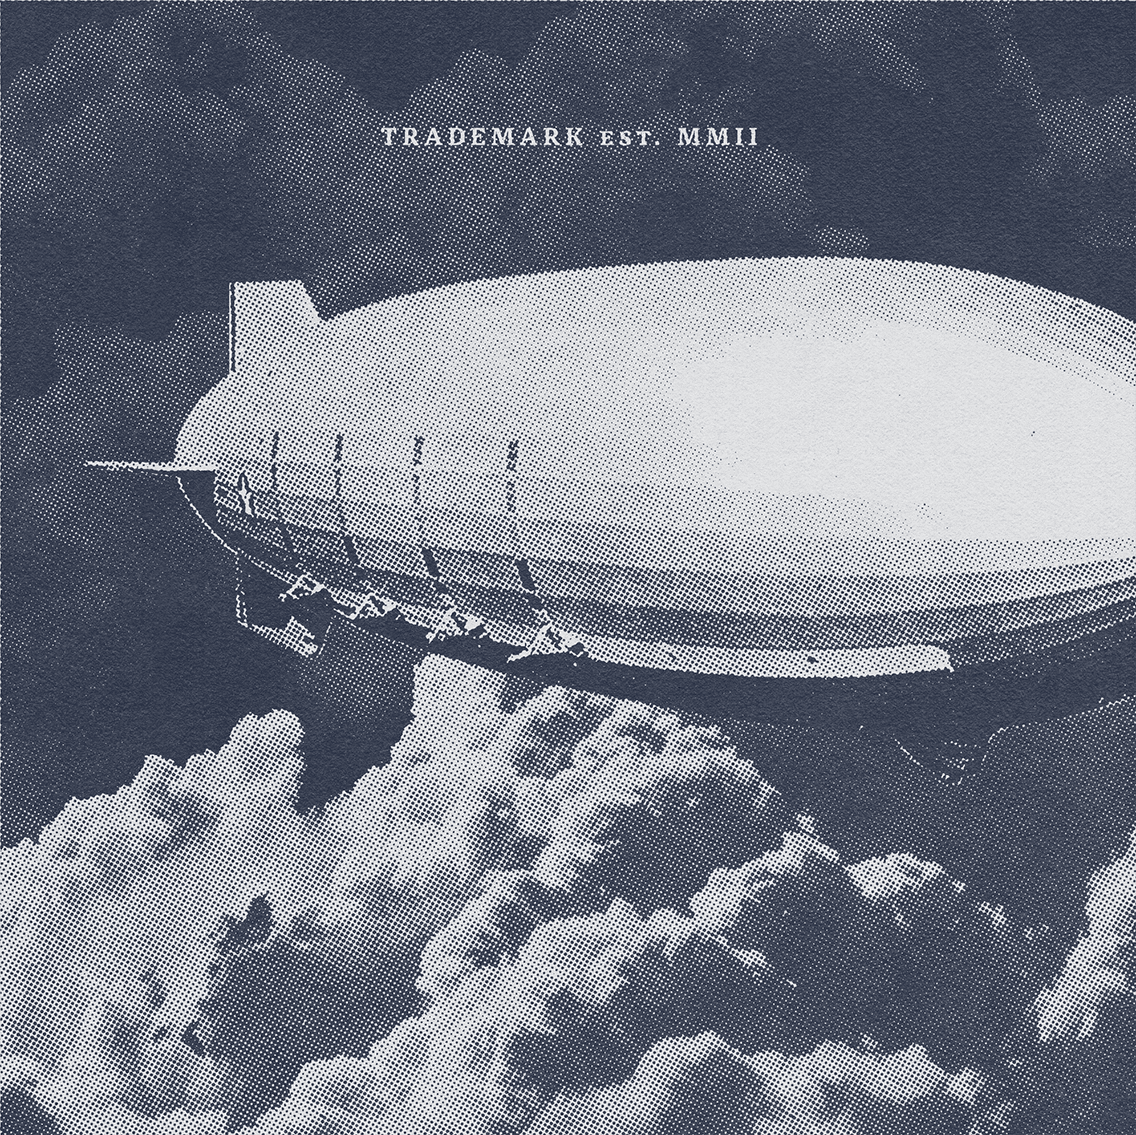 Trademark Est MMII image of airship in the clouds